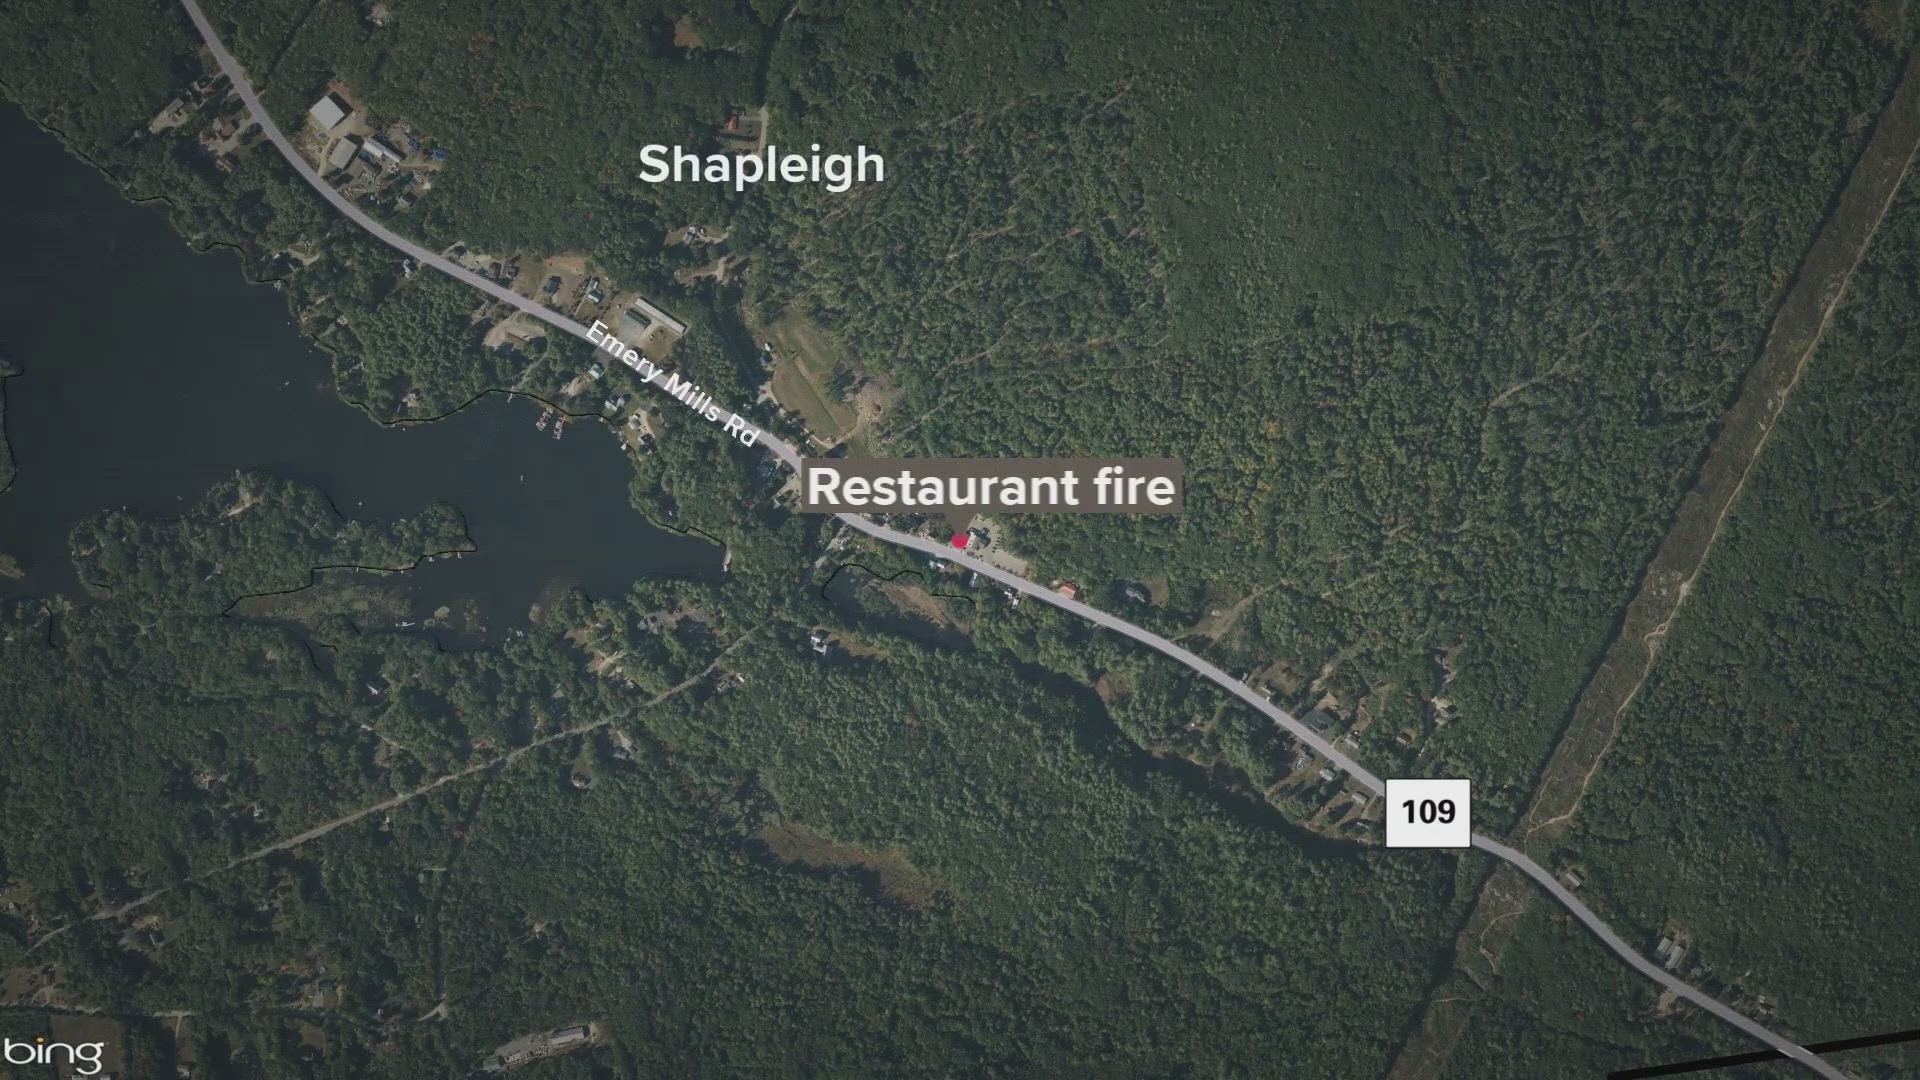 The Office of the State Fire Marshal is investigating a fire at a restaurant in Shapleigh that resulted in the restaurant's owner being taken to the hospital.